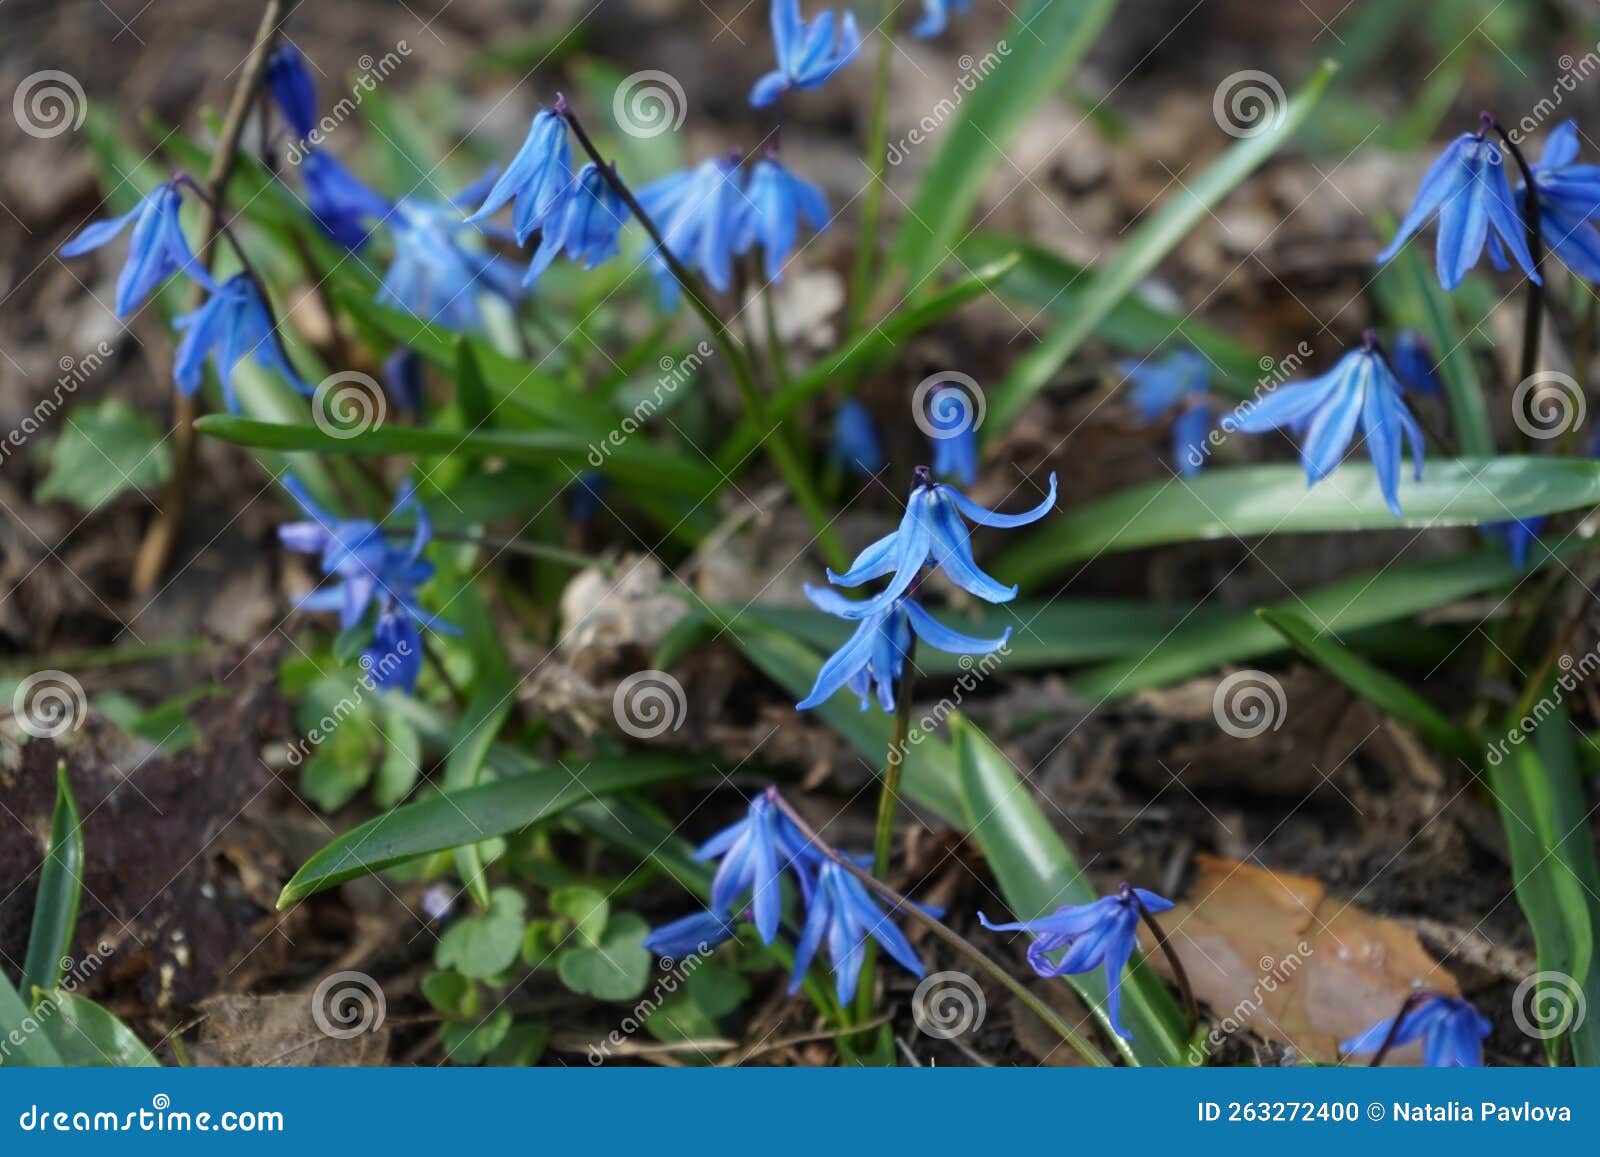 Scilla Siberica Blooms with Blue Flowers in Spring. Berlin, Germany ...